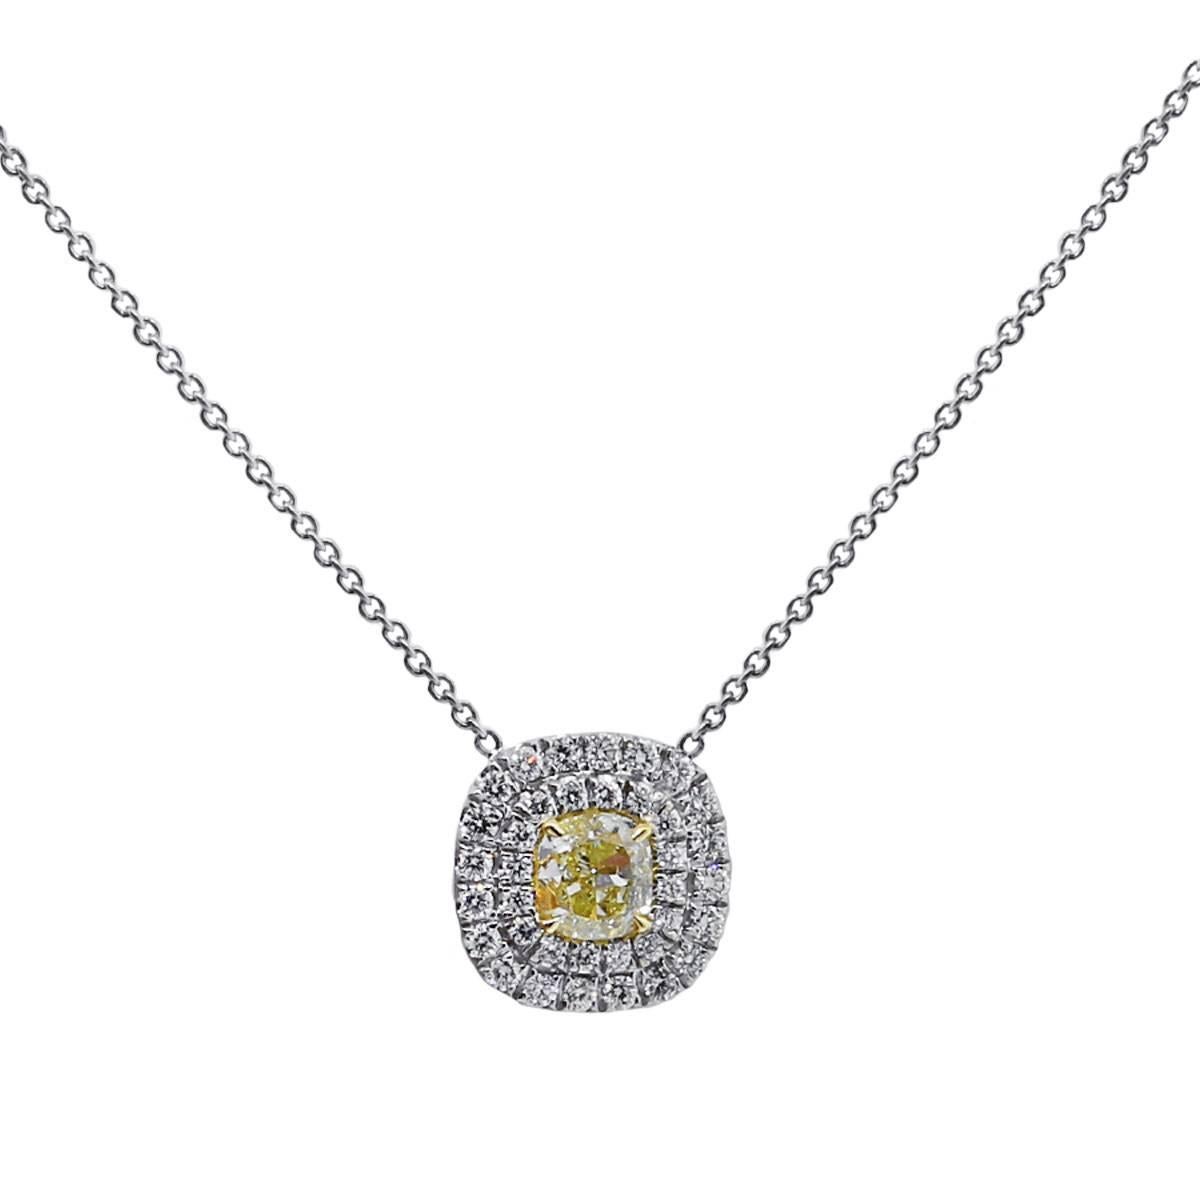 Material: 18k white/yellow gold 
Diamond Details: 1.20 carat fancy yellow cushion cut diamond. Center diamond is SI1 in clarity. GIA certified
Accent Diamonds: Approximately 0.88 round brilliant diamonds. 
Additional Details: This item comes with a